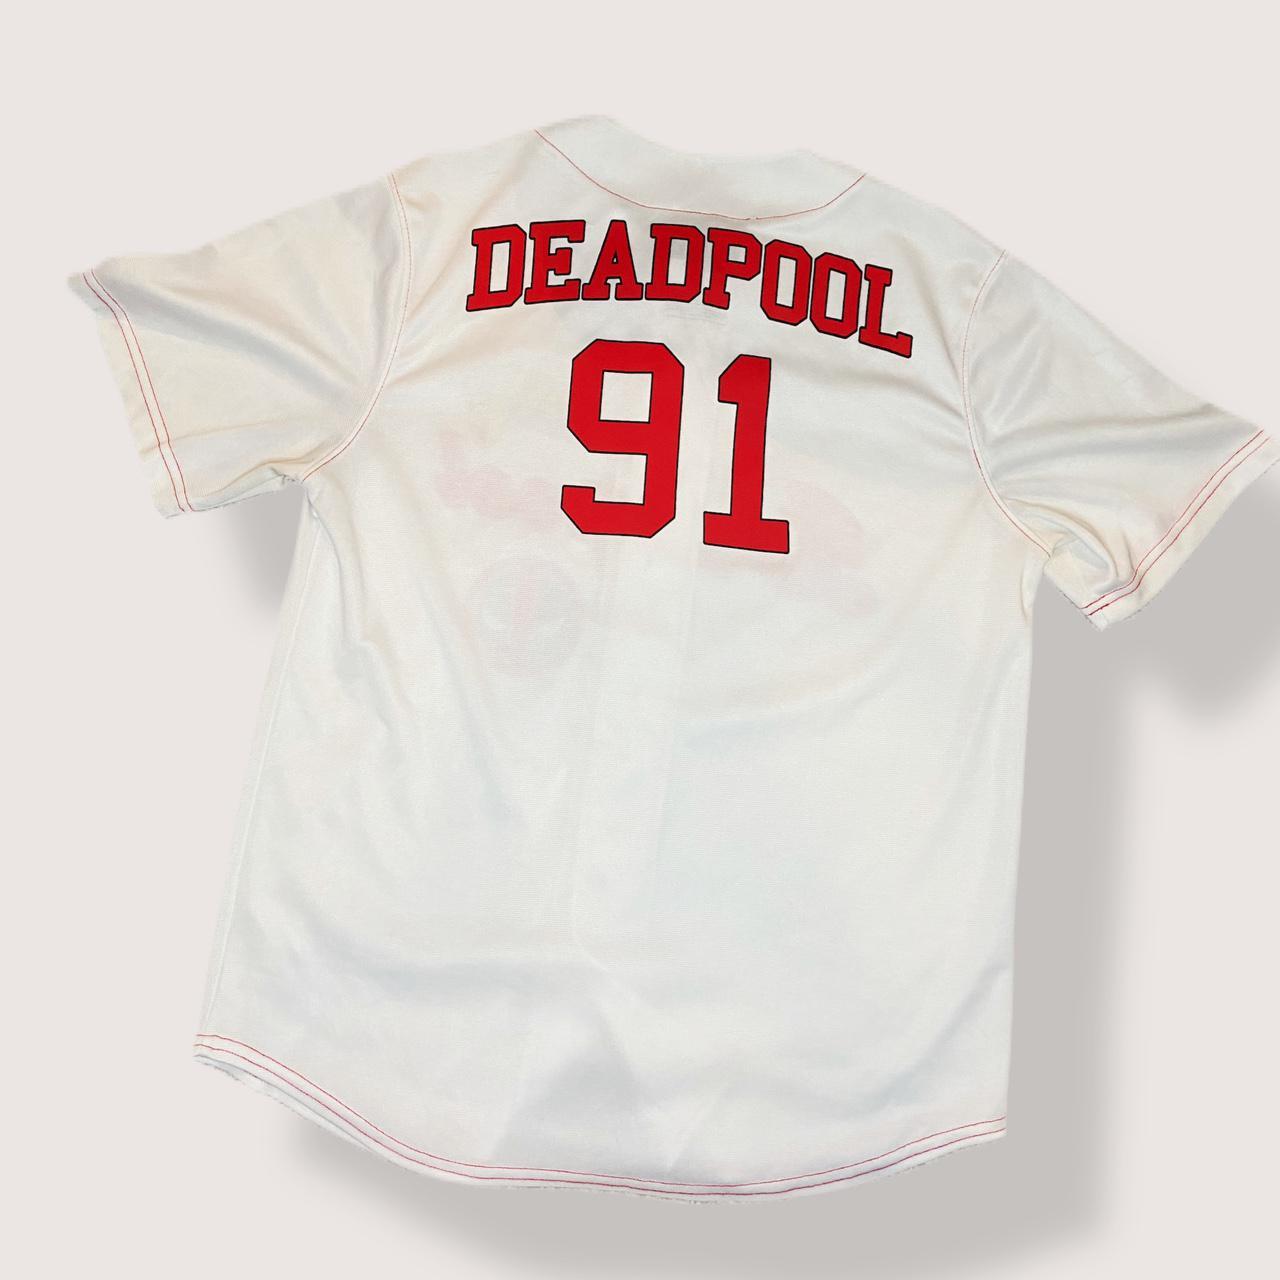 Product Image 2 - Deadpool Jersey ☠️ 🌮 
Size